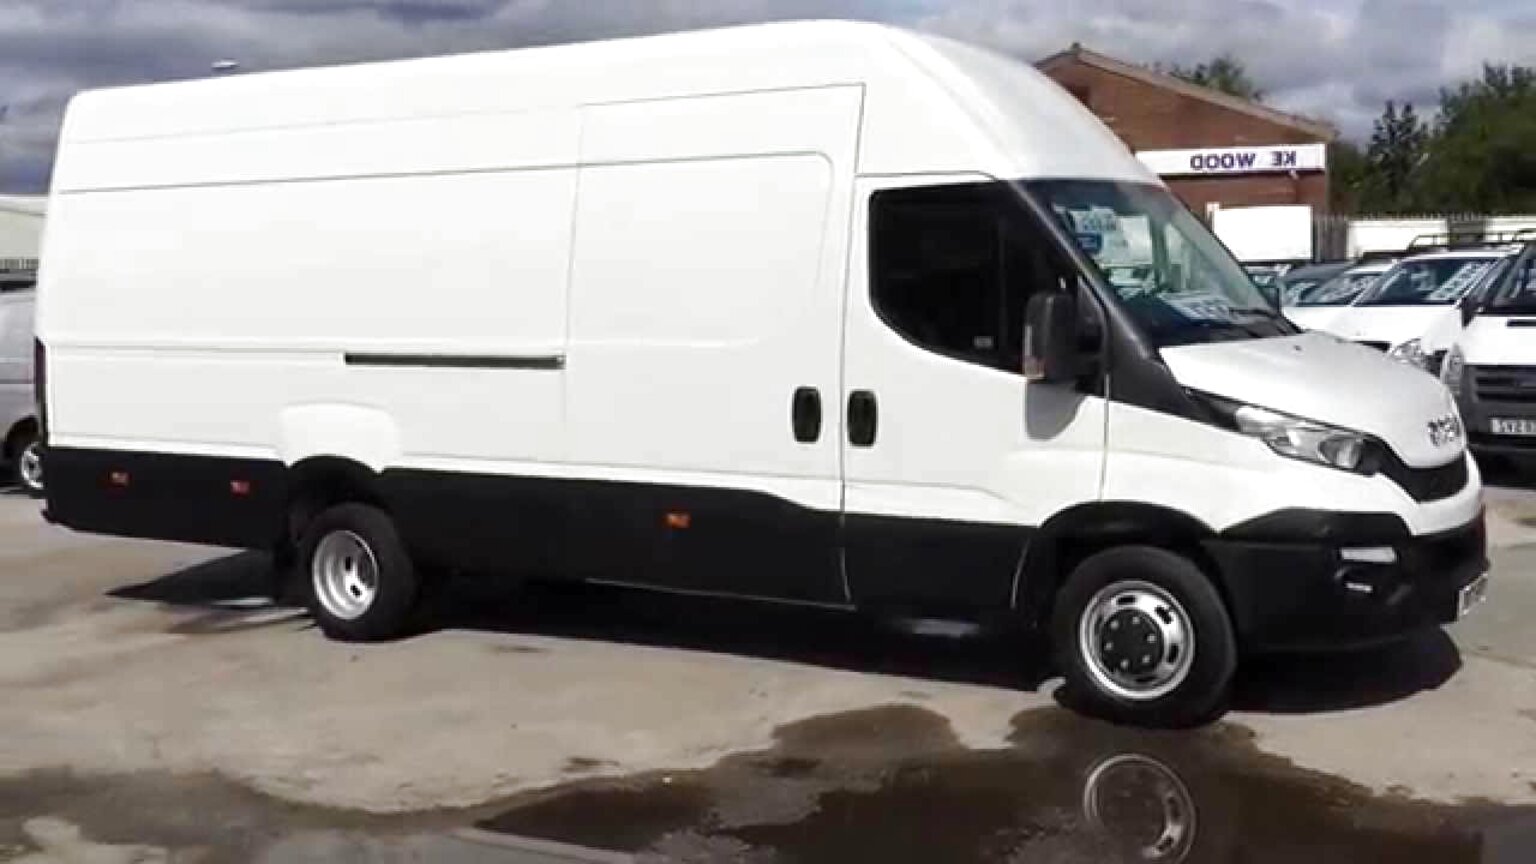 iveco daily for sale uk